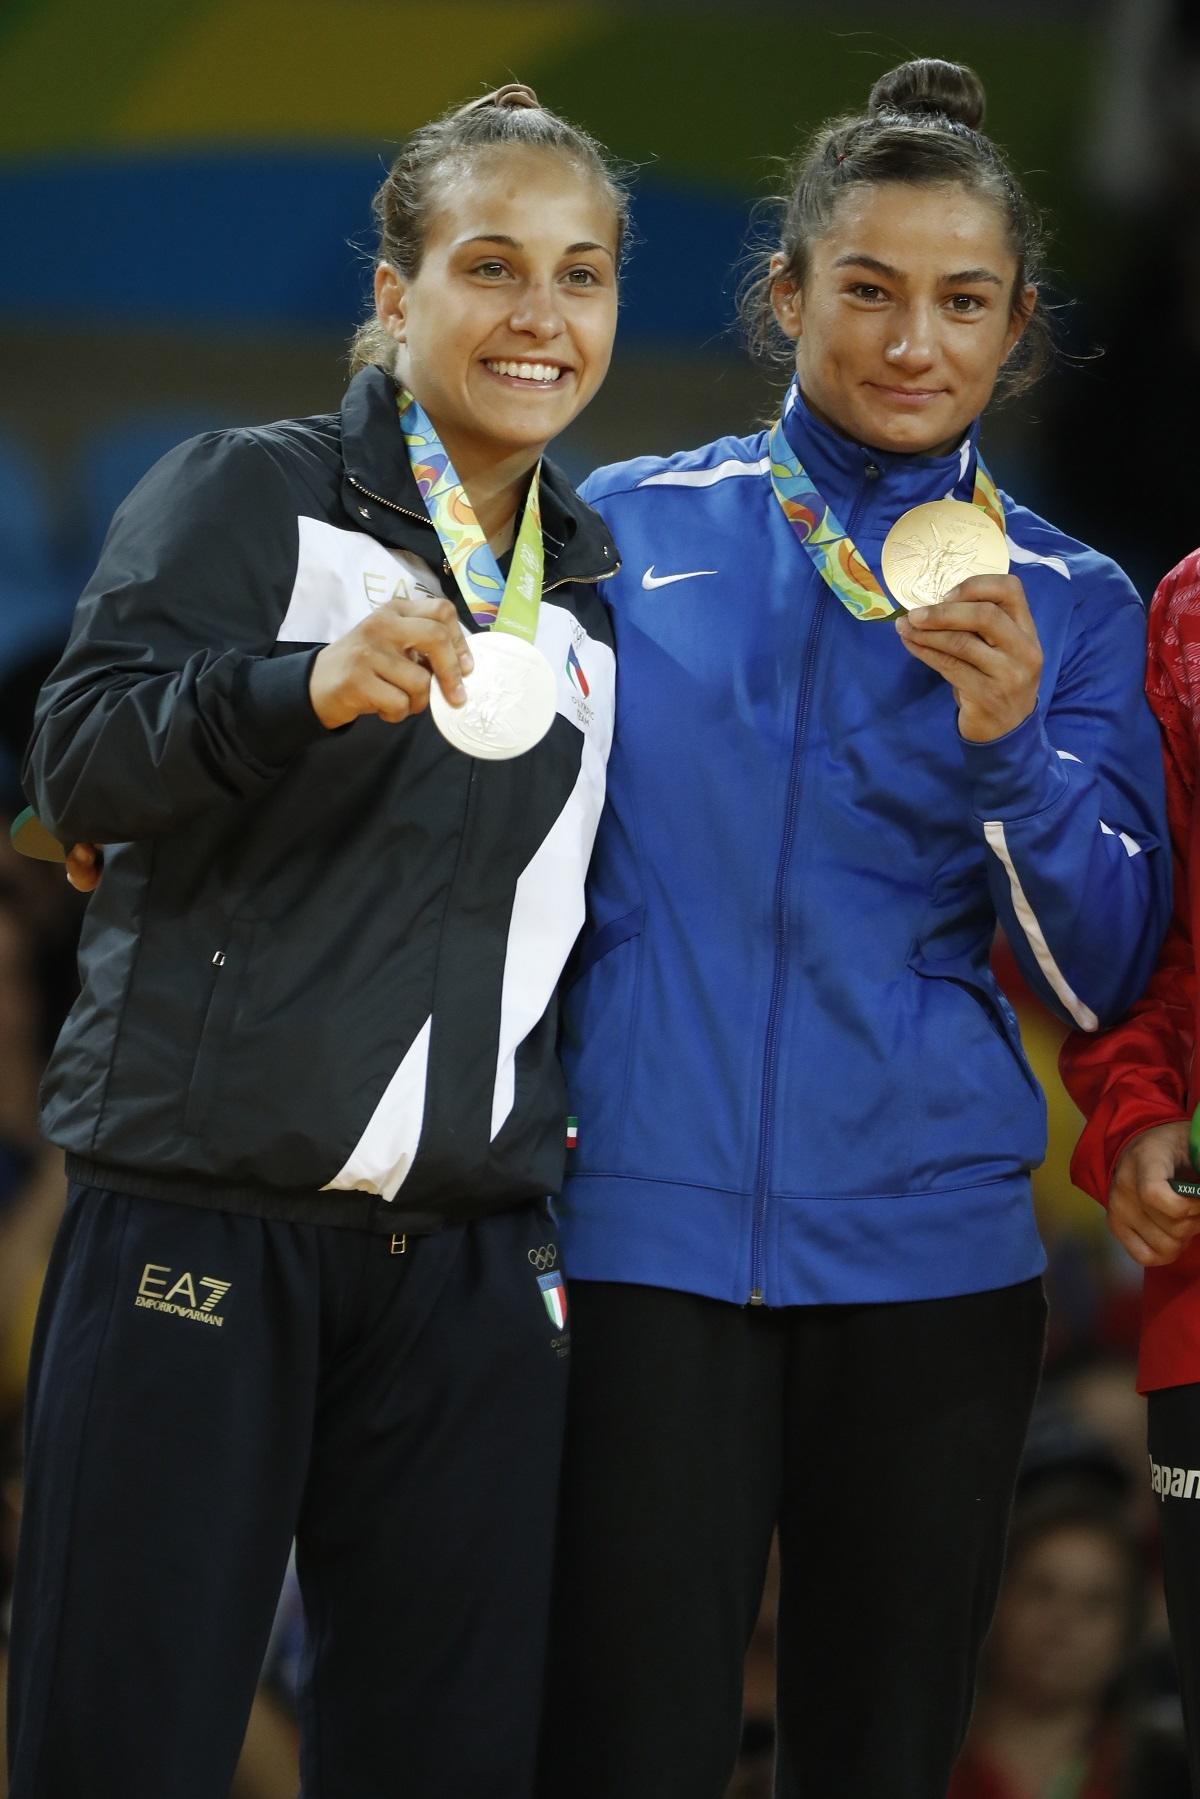 Italy's Odette Giuffrida (l) and Kosovo's Majlinda Kelmendi (r) with their medals. (AFP / Jack Guez)